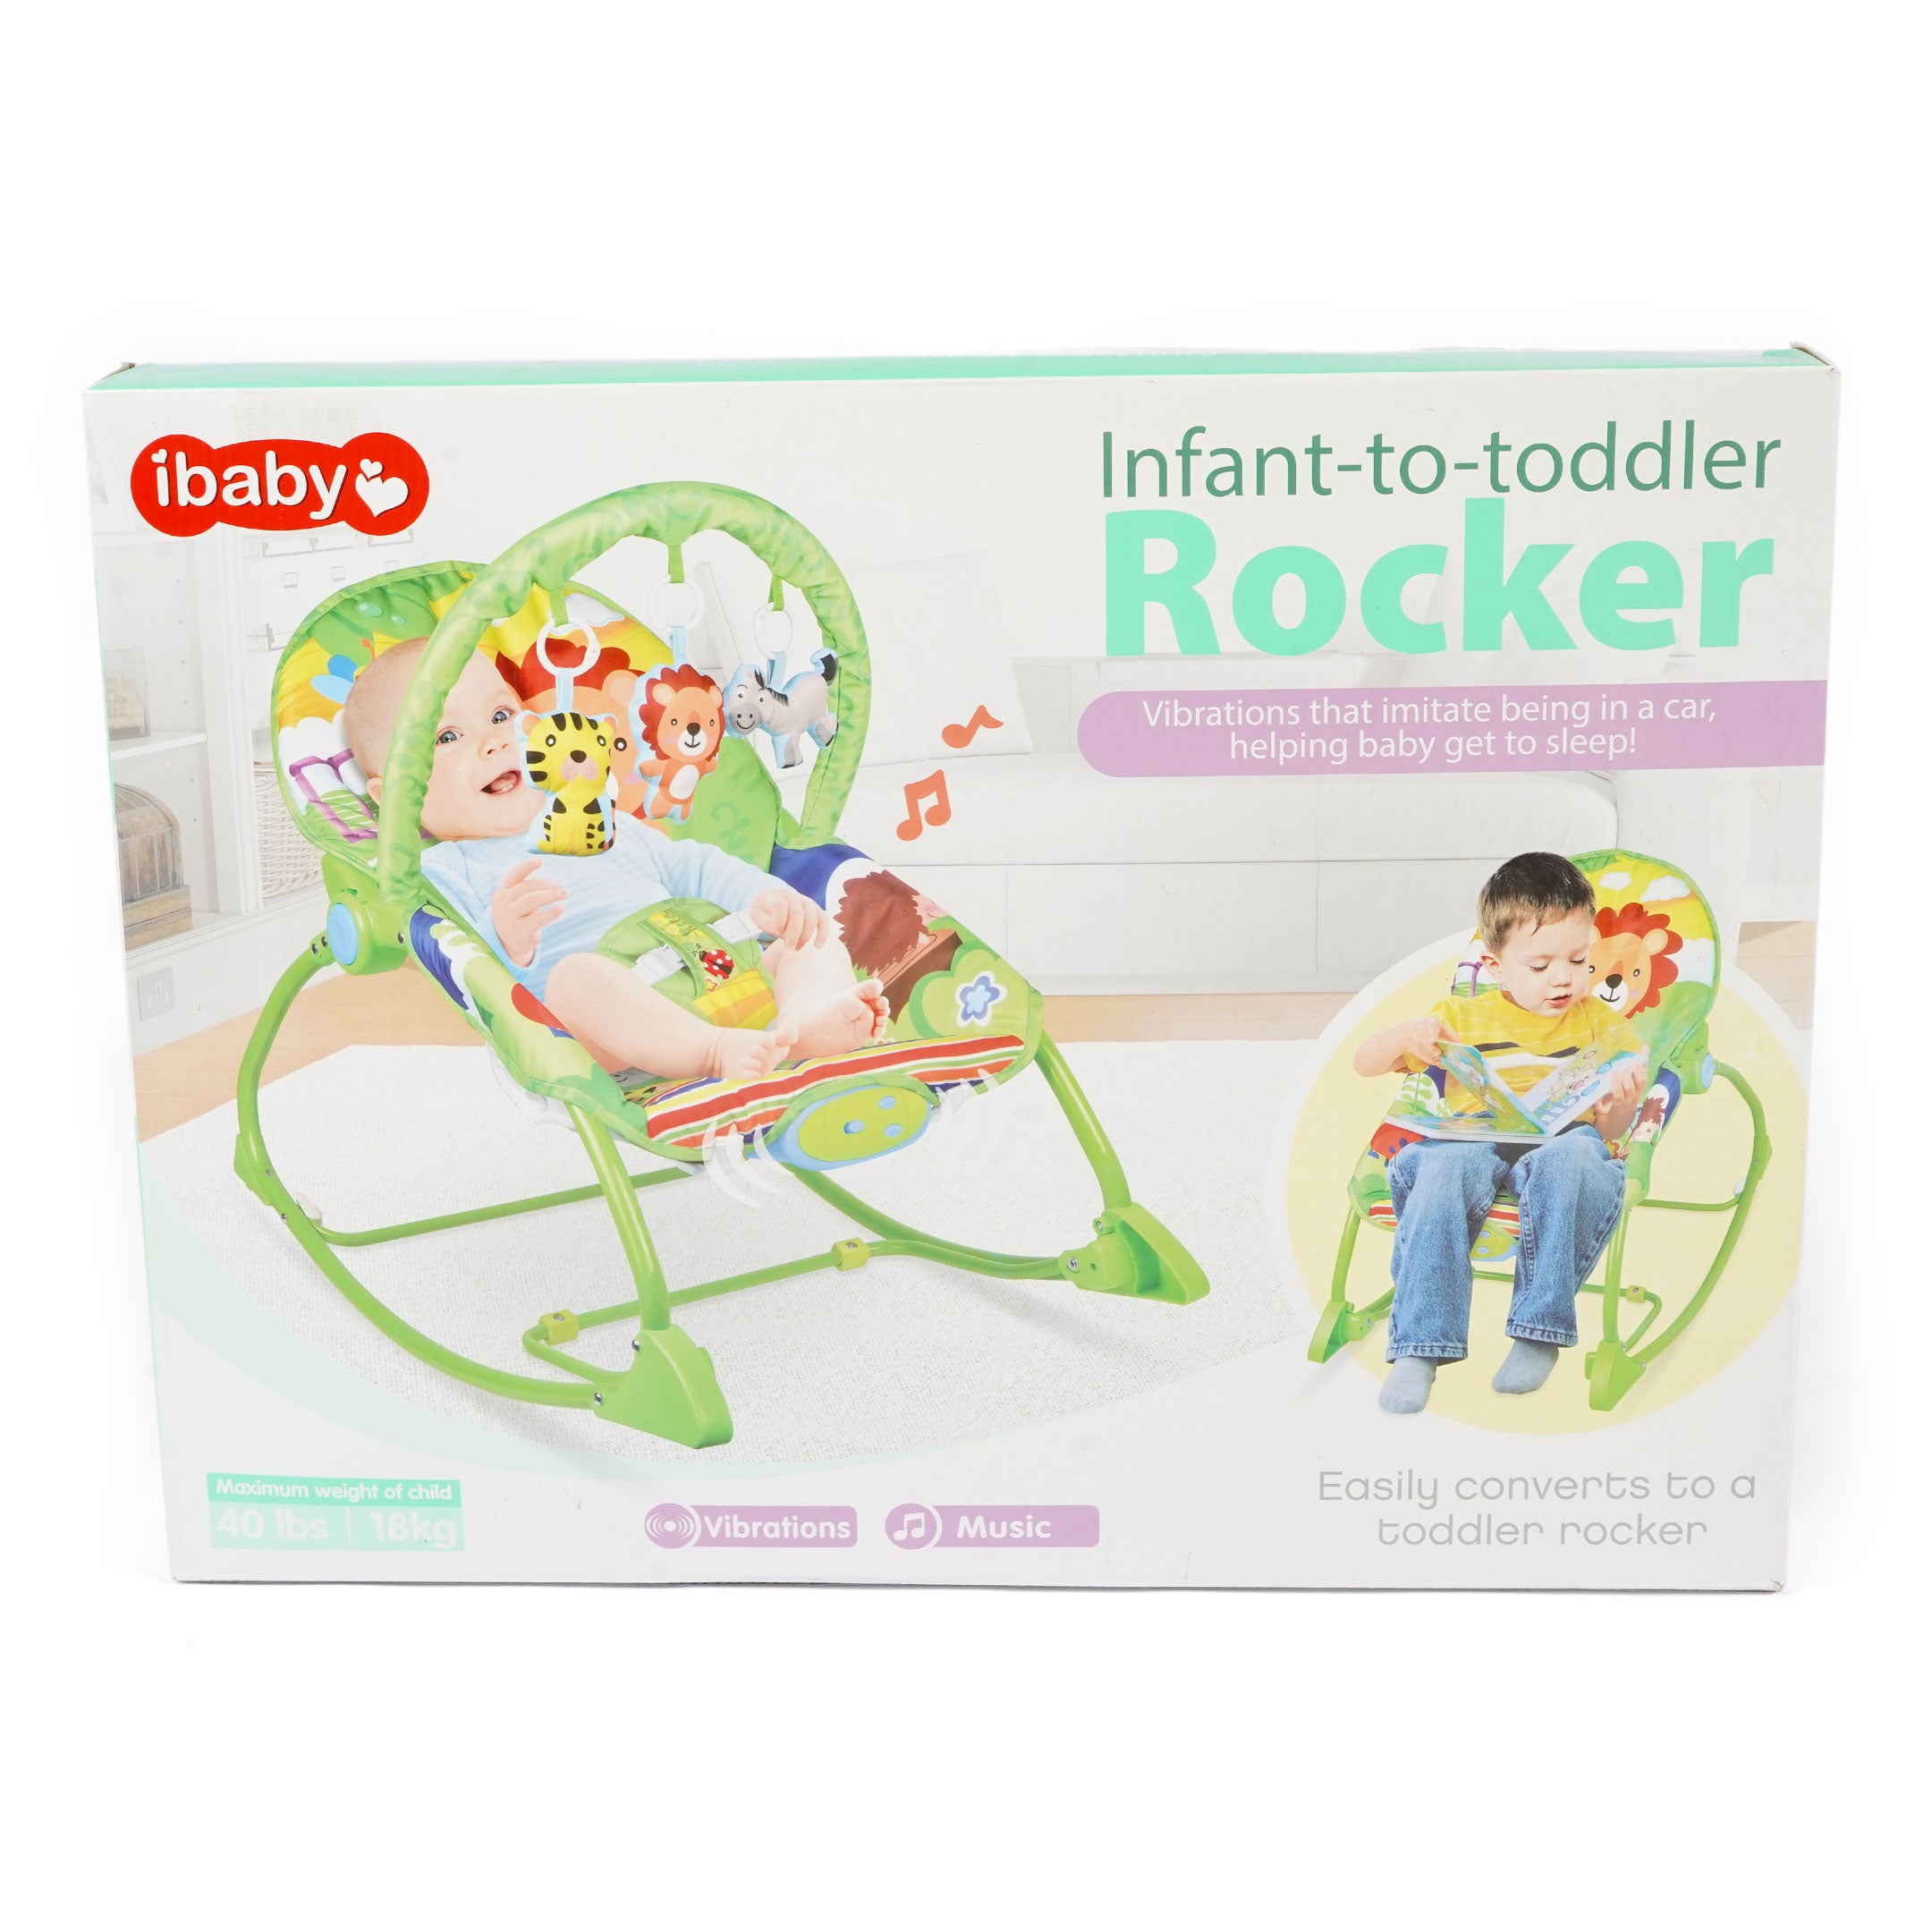 Infant to Toddler Rocker - Green - ibaby